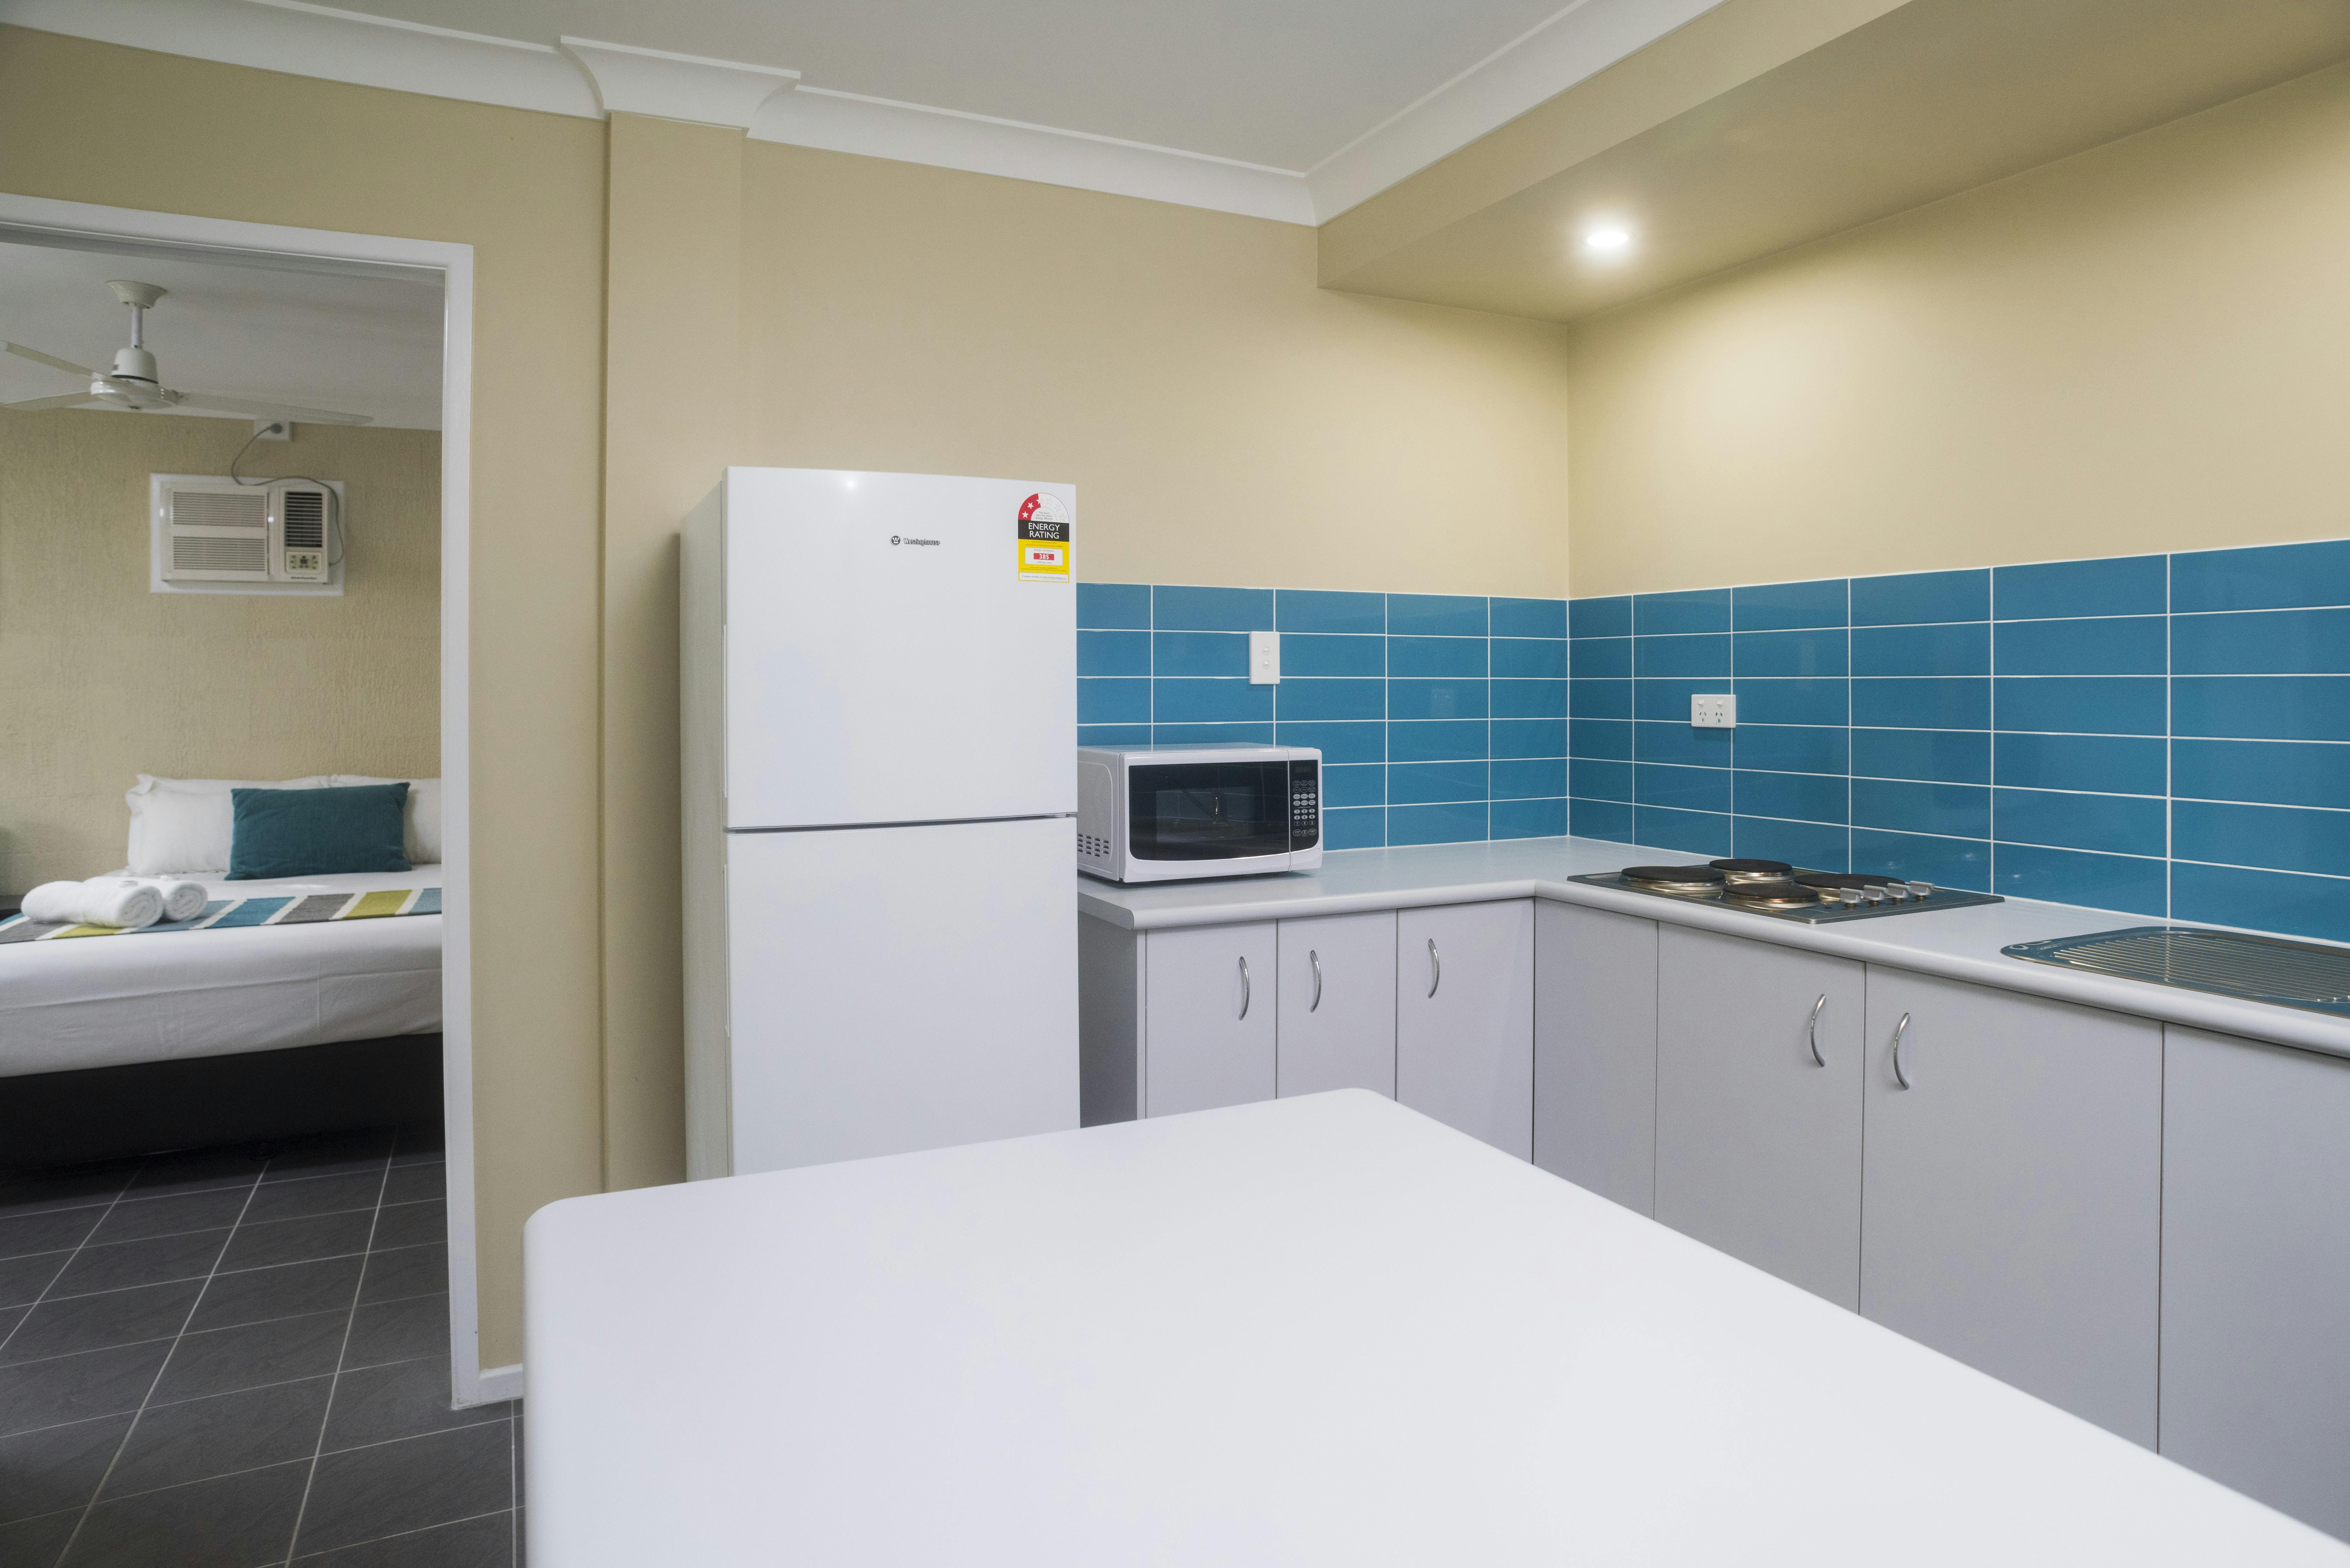 The one bedroom apartment provides a beautiful kitchen for those requiring self contained accommodation.